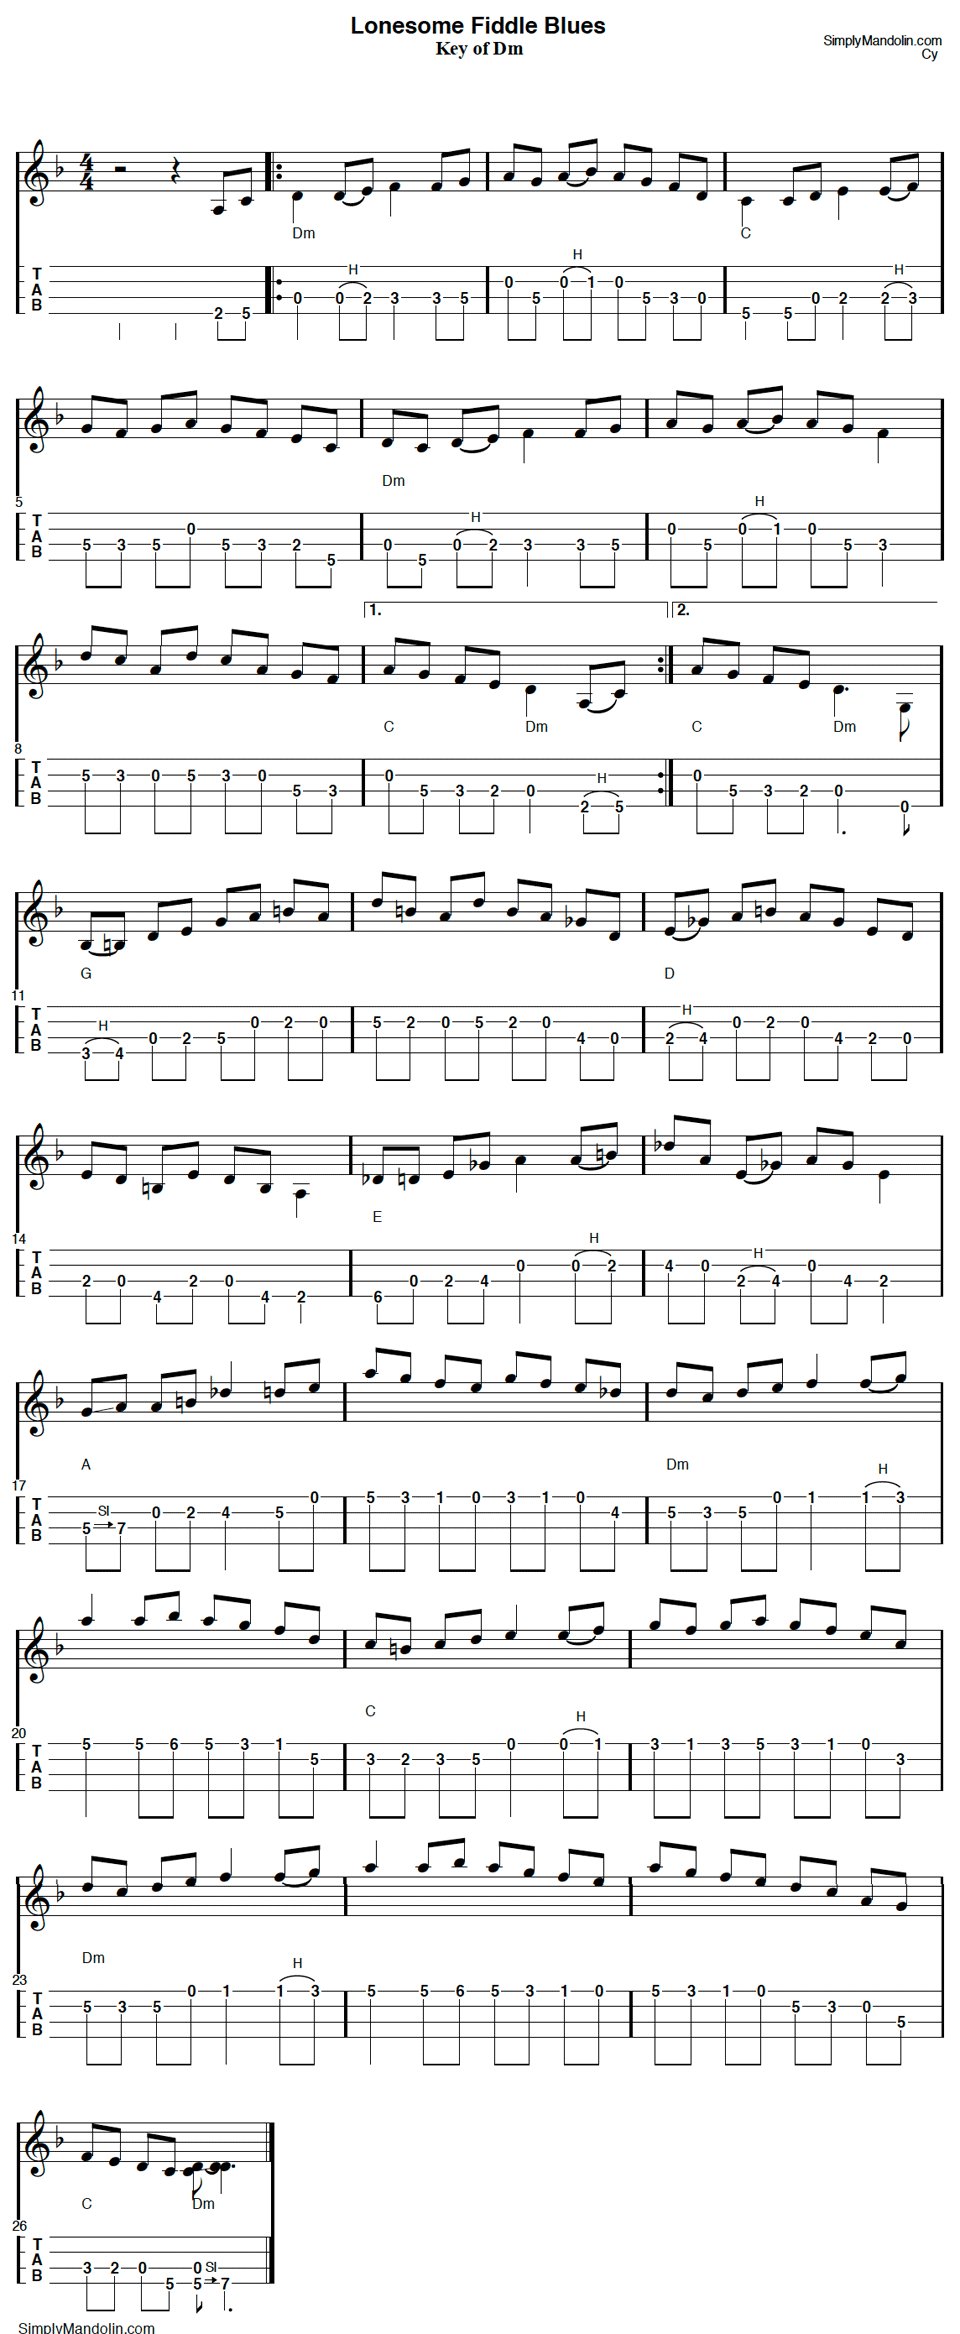 mandolin tablature for "Lonesome Fiddle Blues"